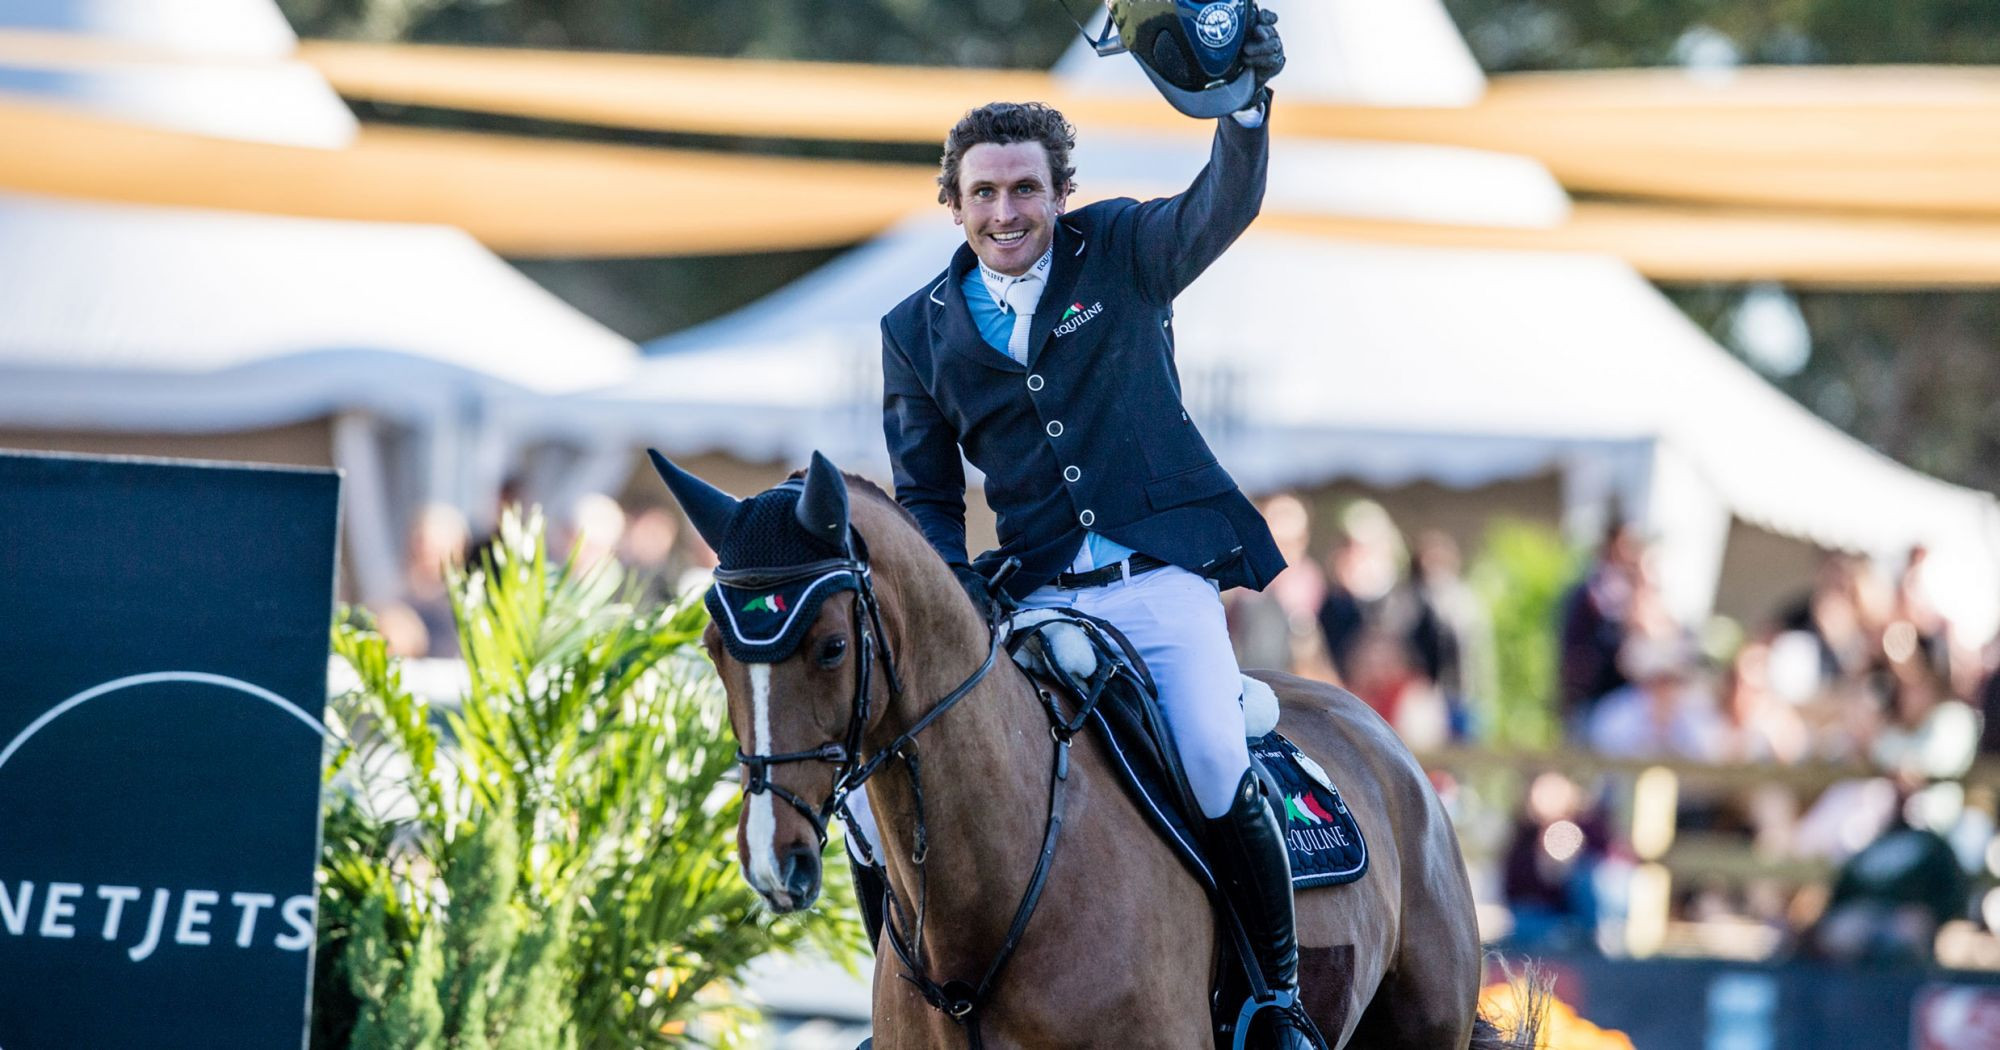 Kenny triumphs at FEI Jumping World Cup in Wellington